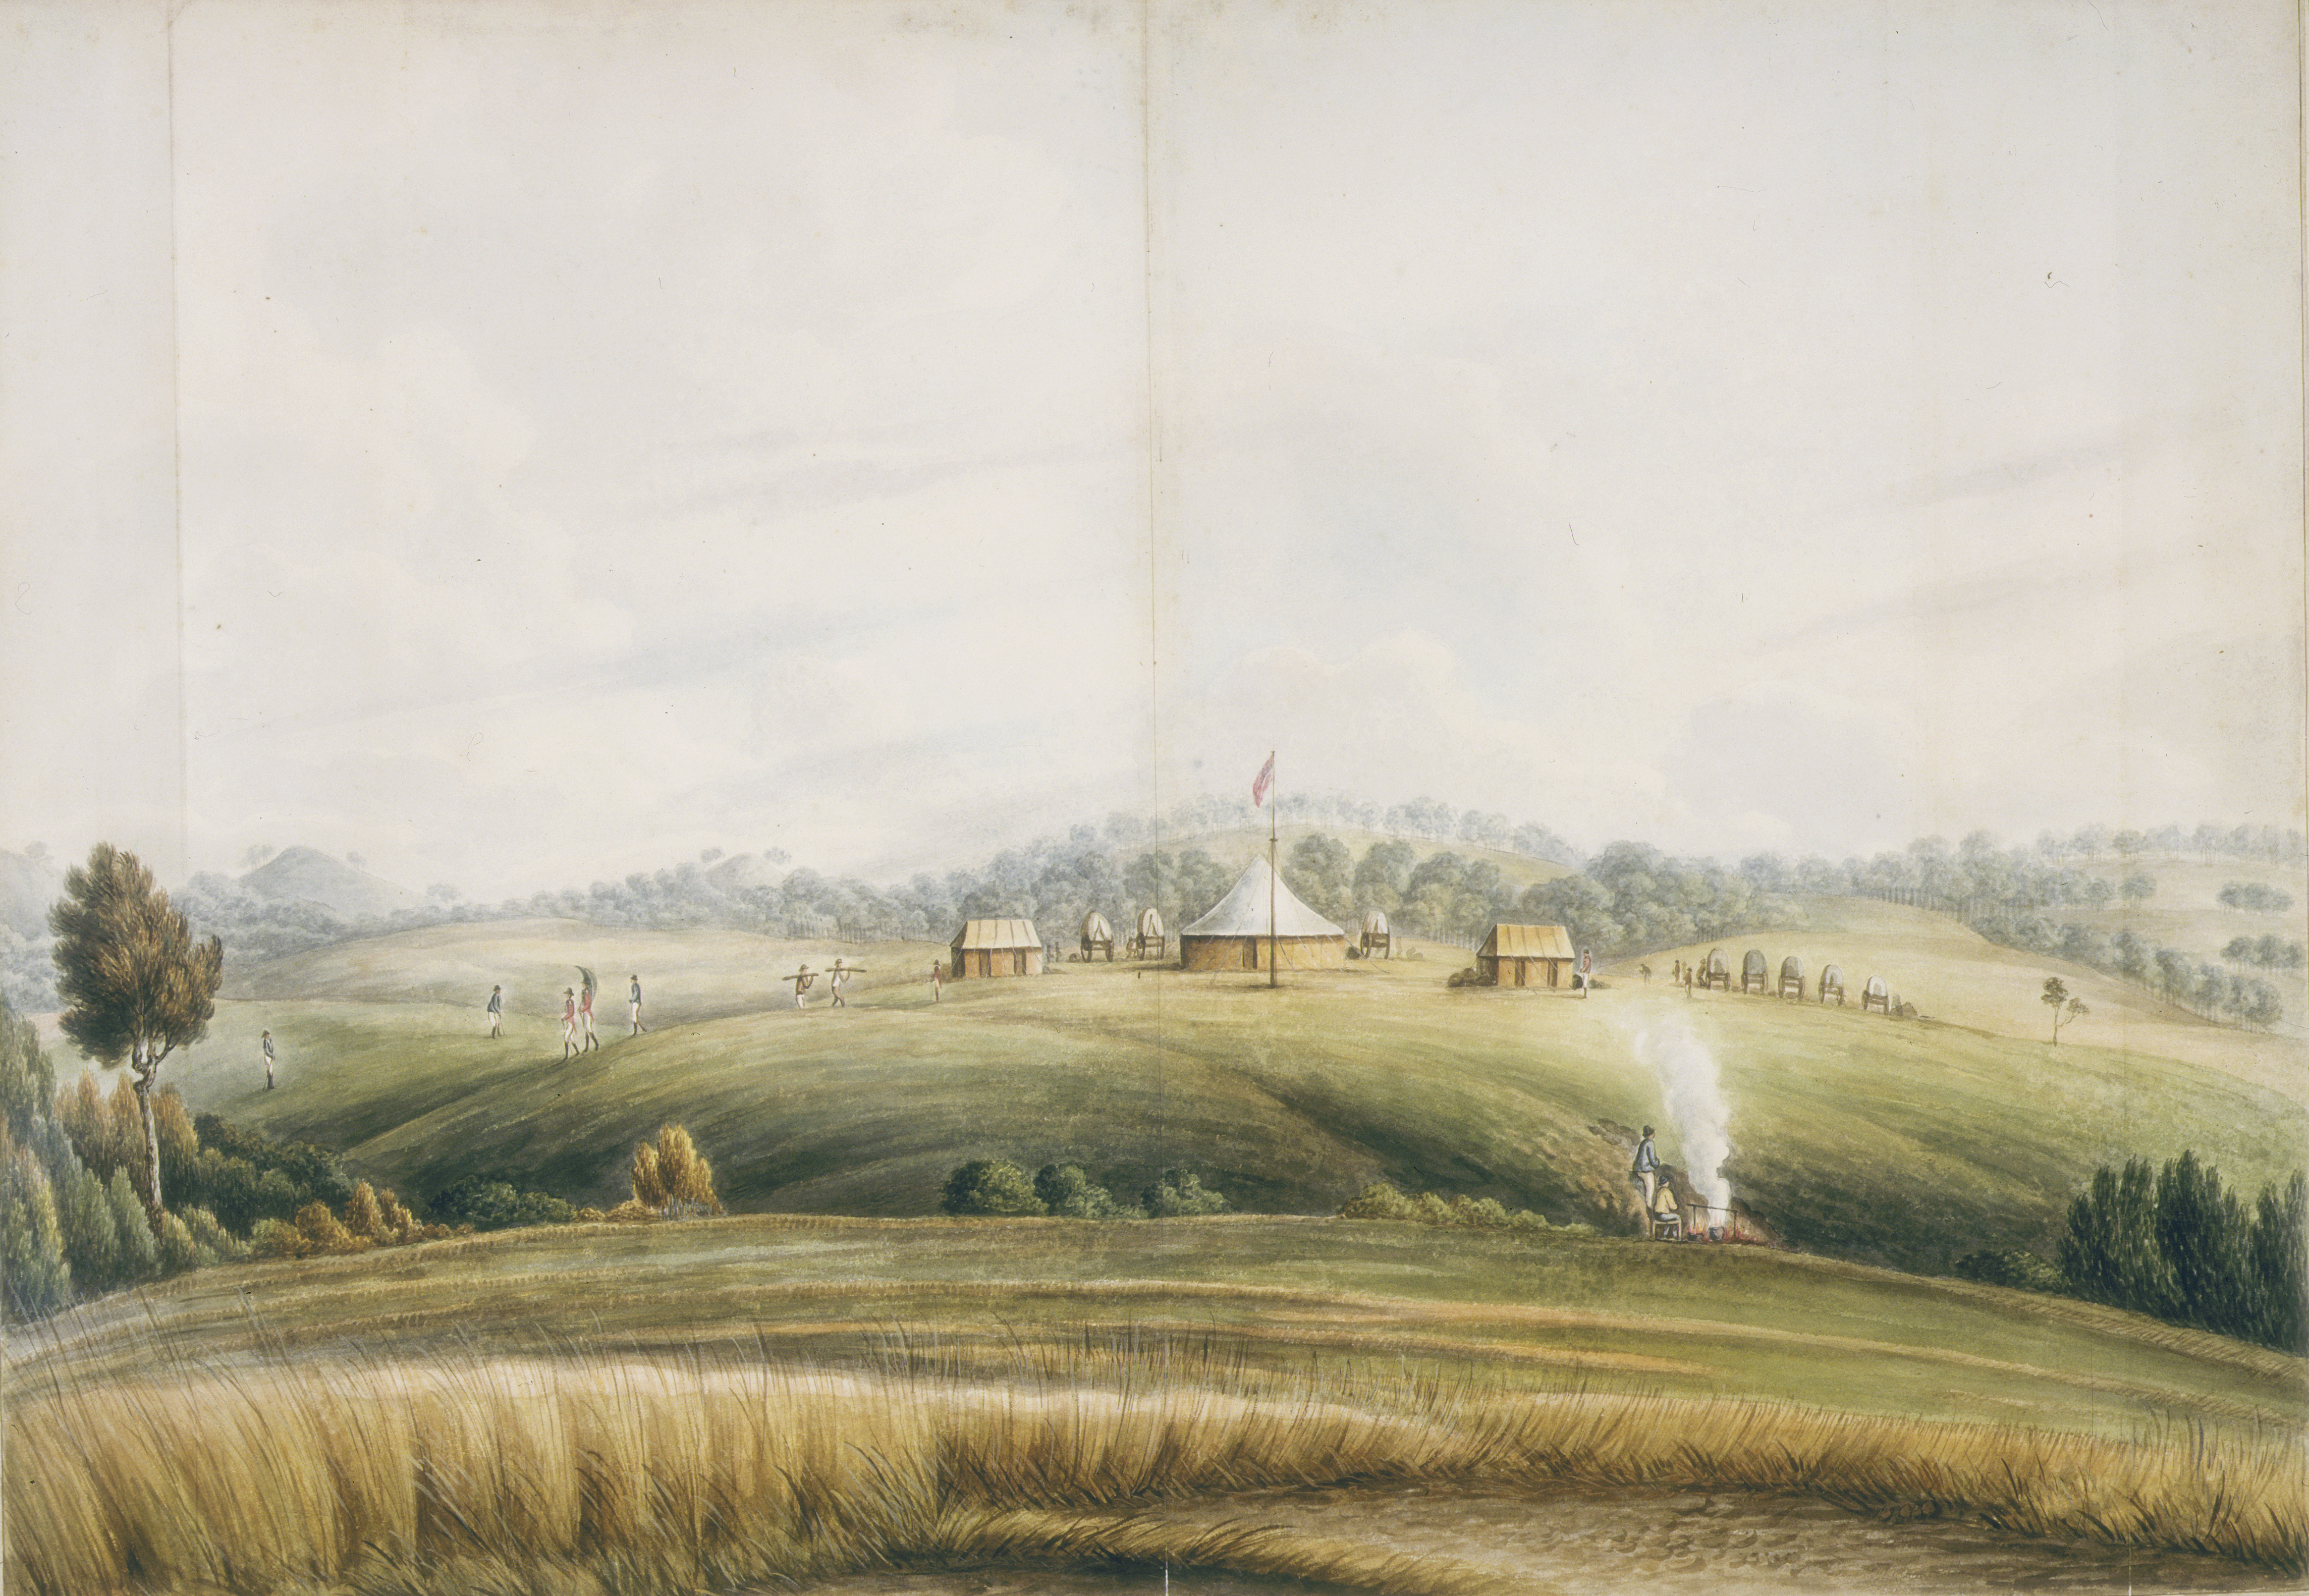 A painting of a landscape with early colonial structures on top of a grassy hill surrounded by pastural land. Soldiers and workers can be seen moving amongst the building and parked buggies while two men tend a fire in the foreground pasture. 